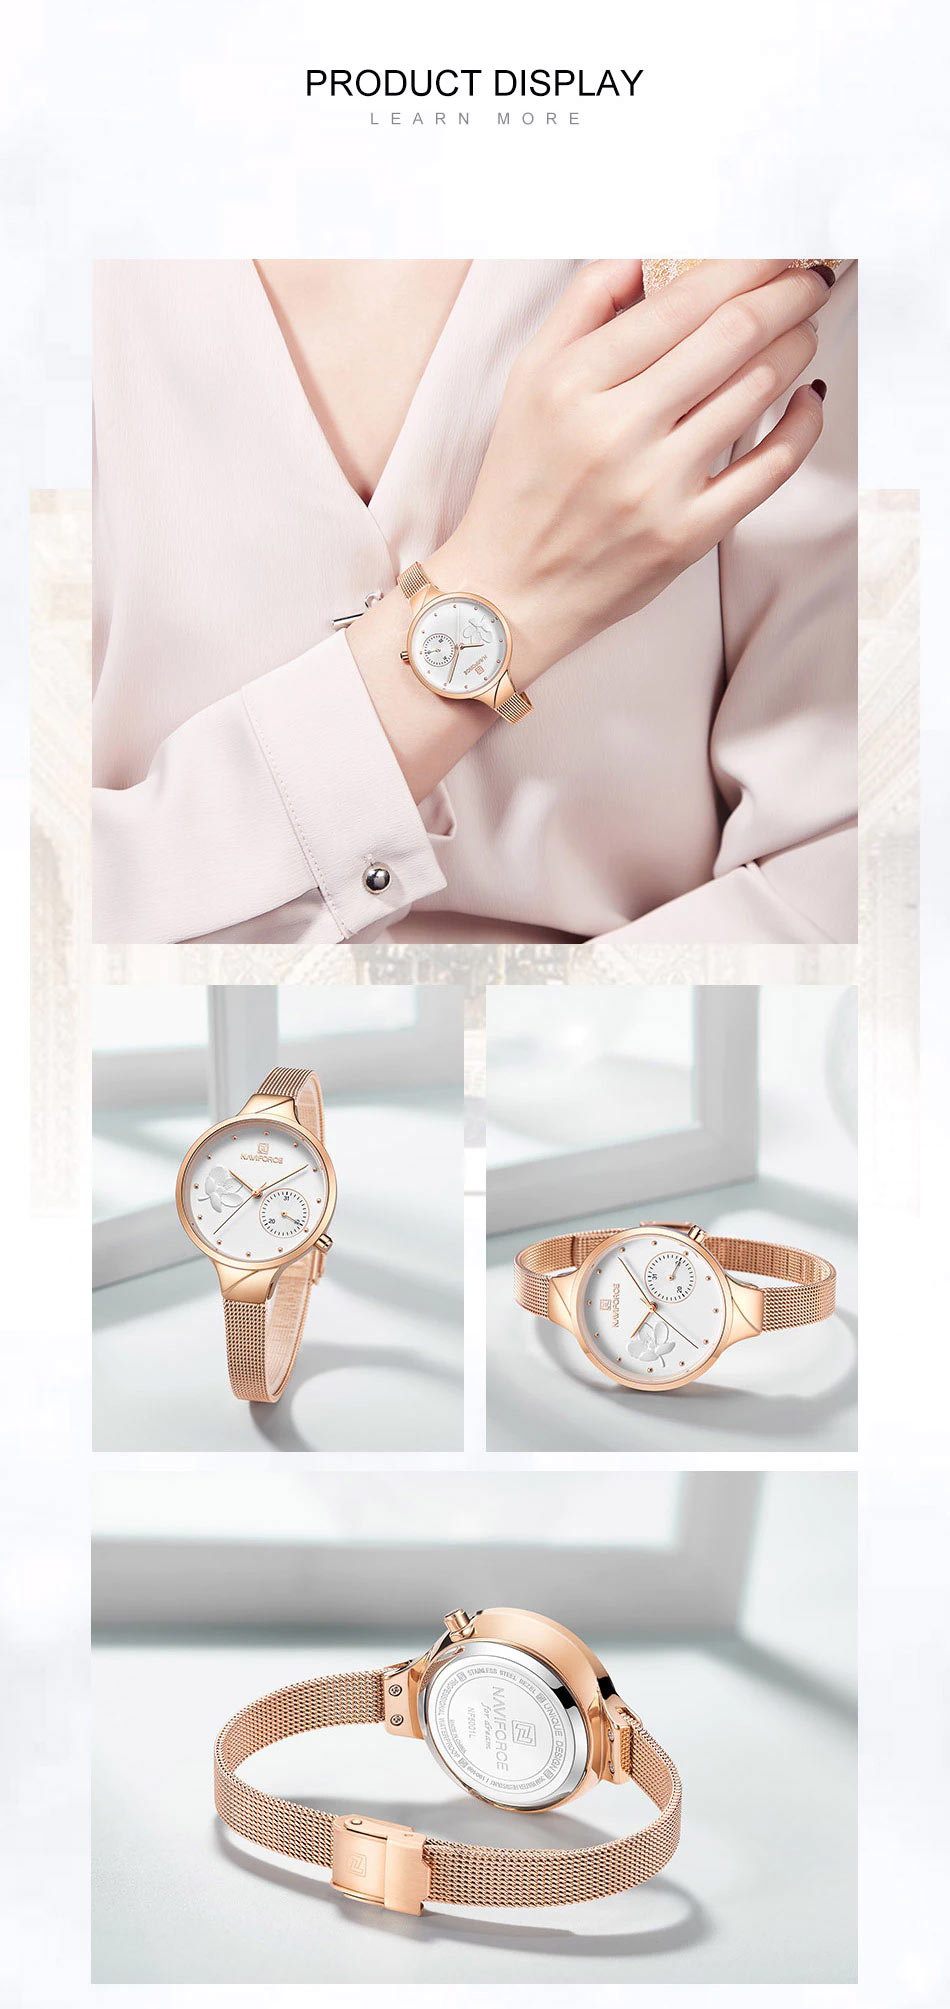 NaviForce NF5001 rose gold stainless steel white flower printed dial ladies gift watch